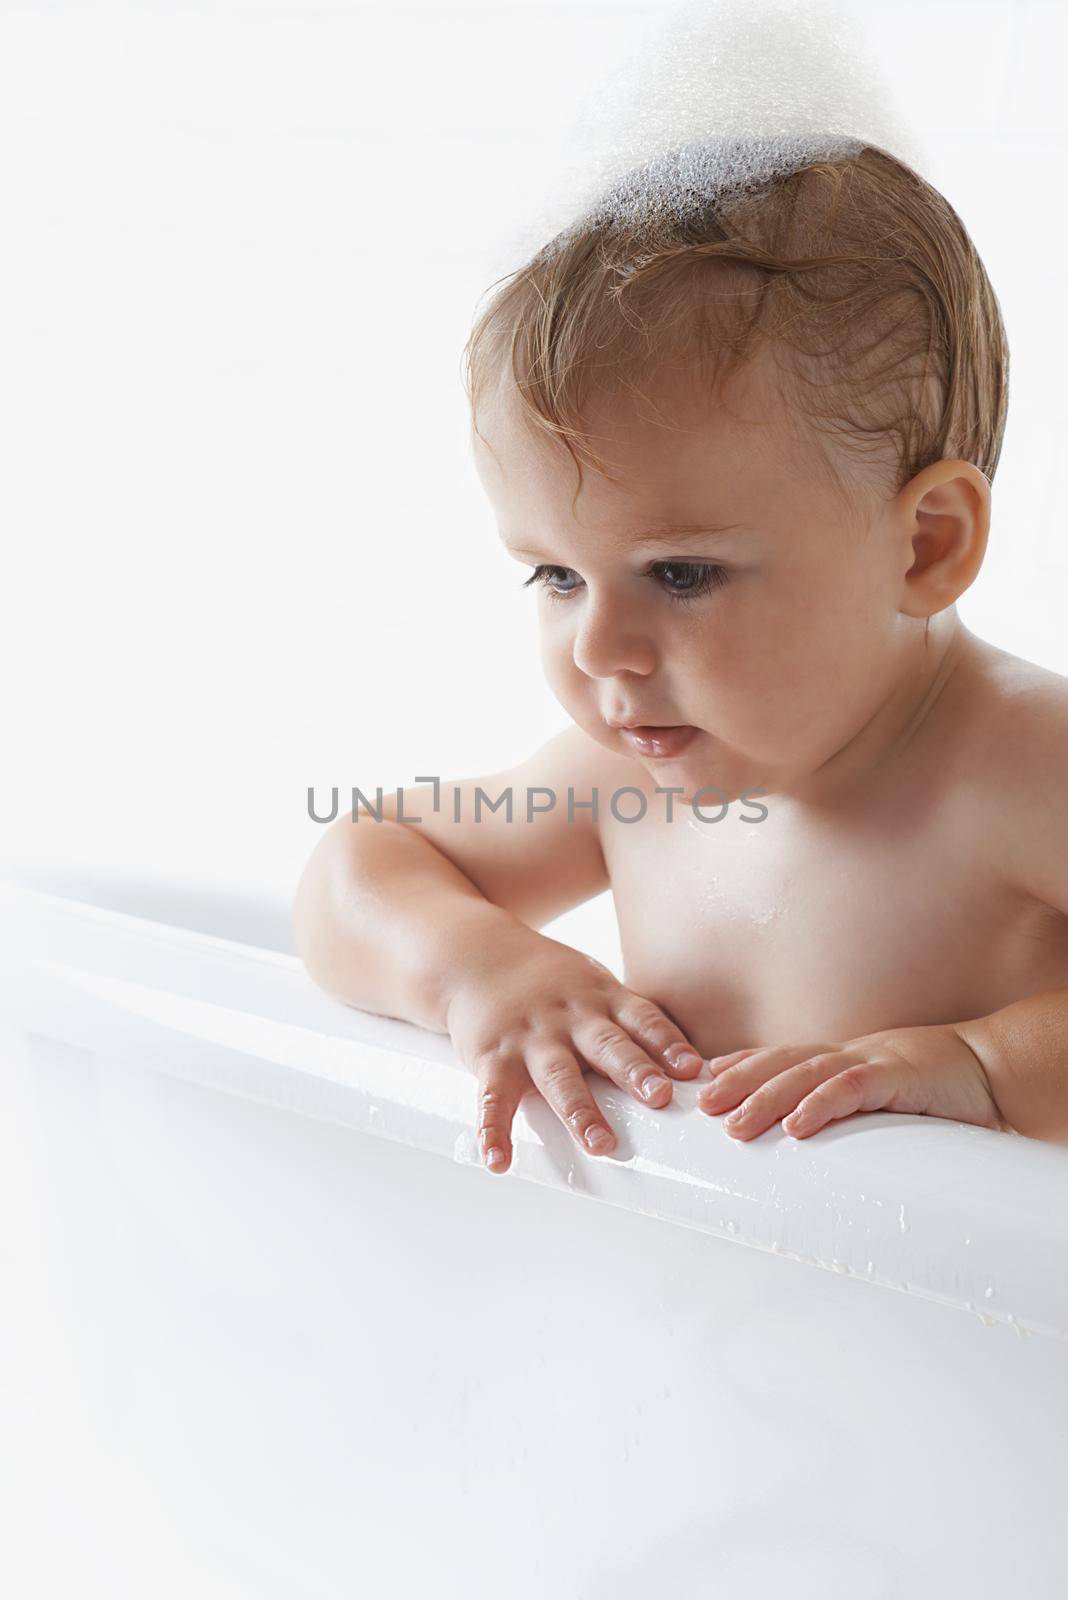 Hes having his bath before bed. An adorable baby boy standing in the bathtub. by YuriArcurs